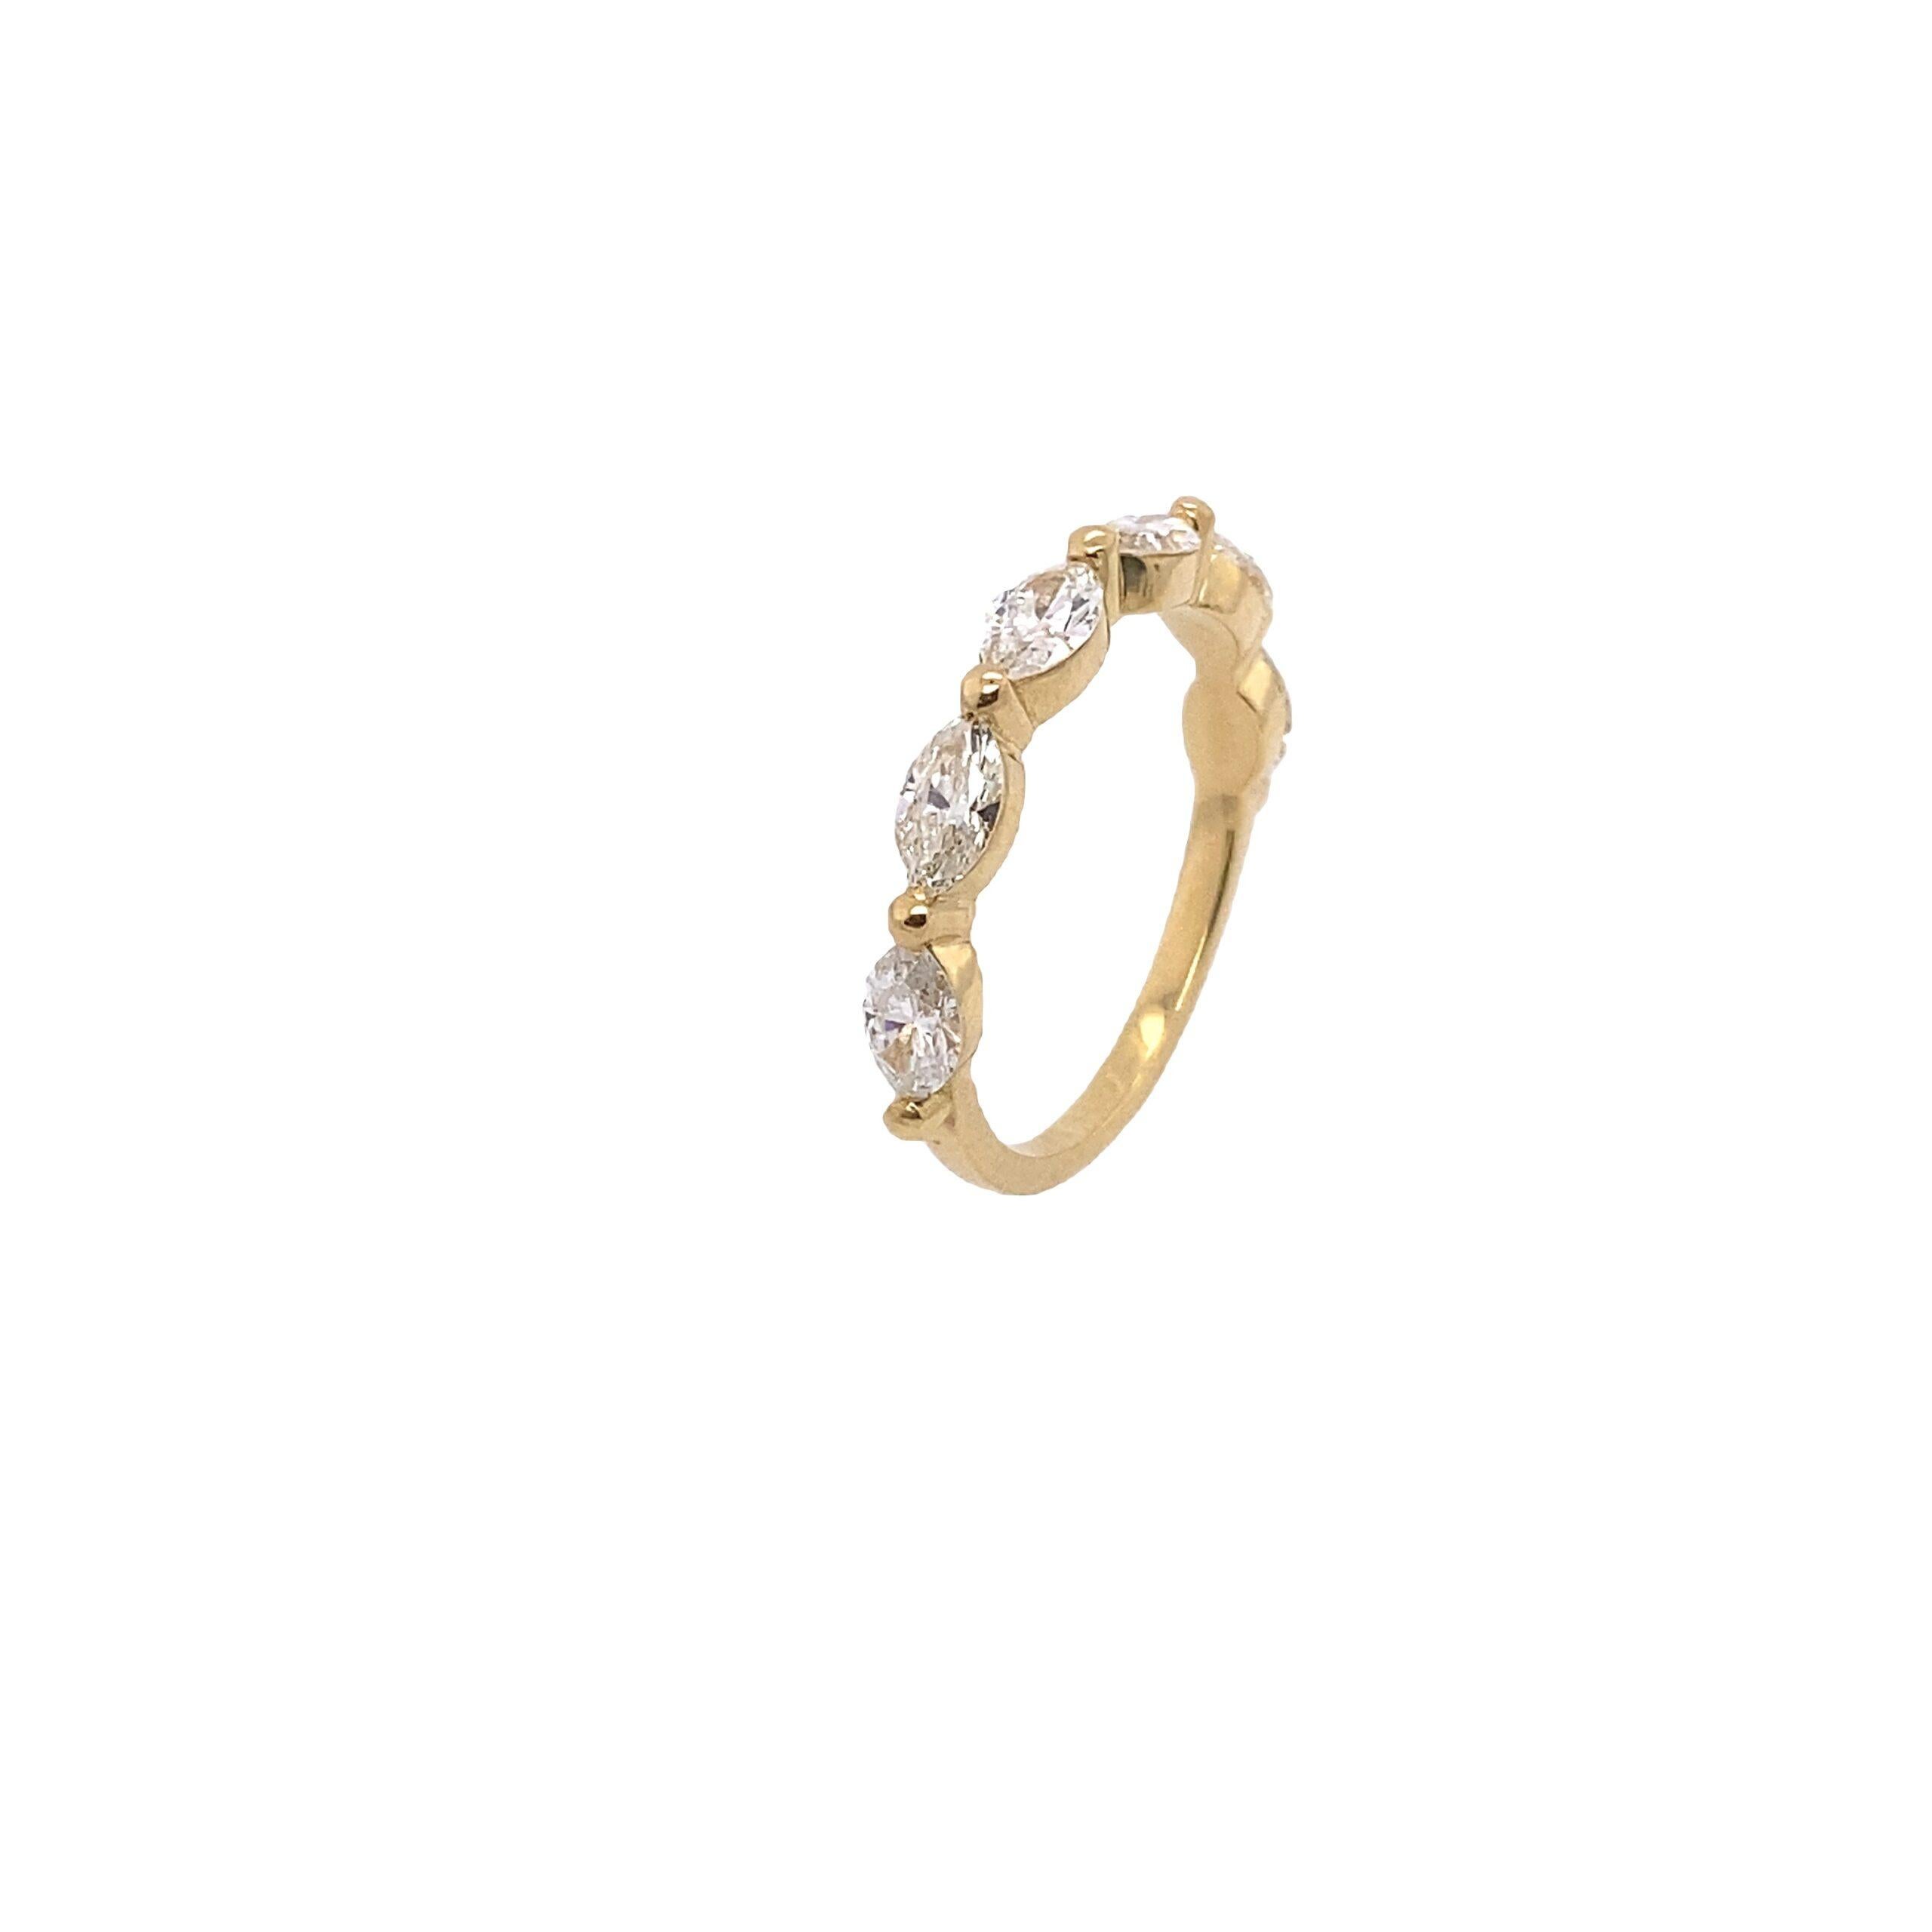 New 6 Stone Oval Diamonds Eternity/Wedding Ring, 1.14ct I/J VS2 Purity Set in 18ct Yellow Gold Made by Jewellery Cave.

Additional Information:
Total Diamond Weight: 1.14ct
Diamond Colour: J
Diamond Clarity: VS
Width of Band: 1.86mm
Width of Head: